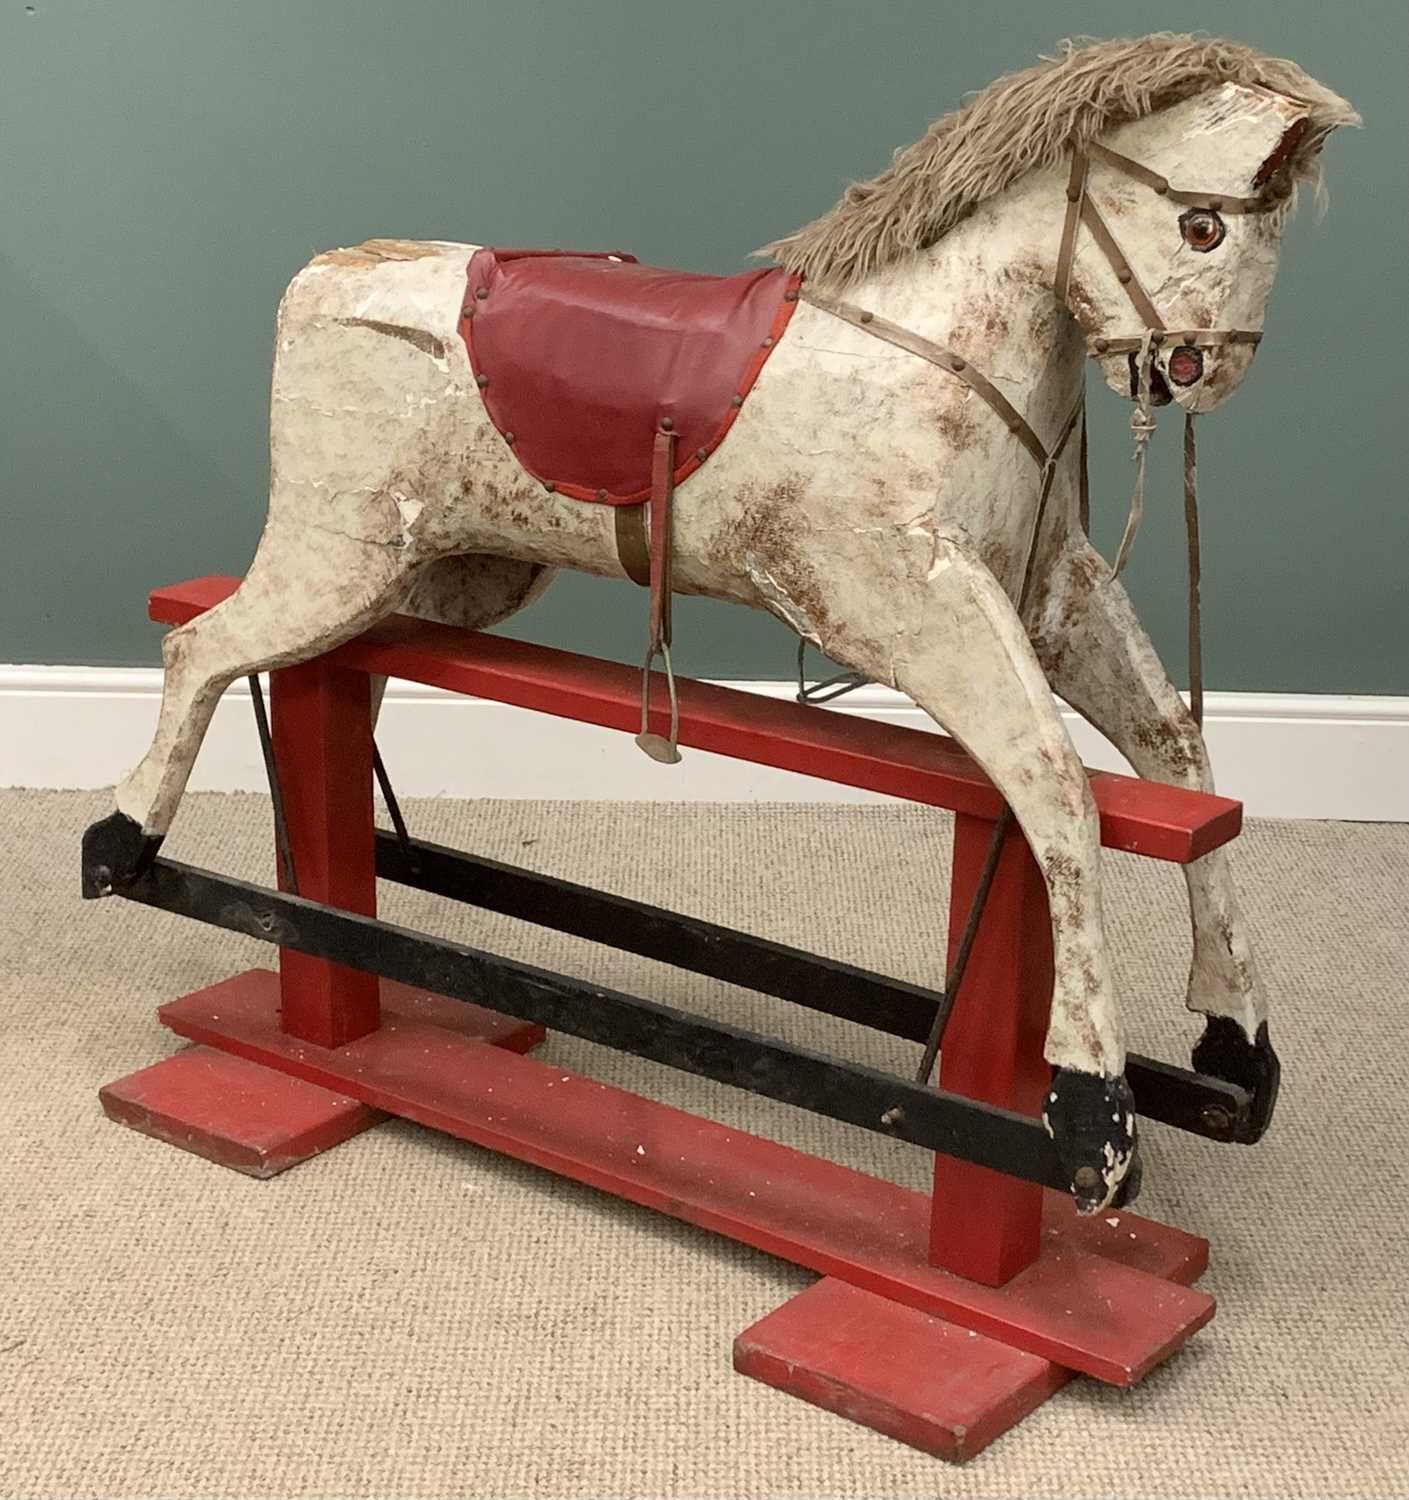 VINTAGE ROCKING HORSE painted white with a red base and saddle, 106 (h) x 116 (w) x 40 (d) cms - Image 2 of 3